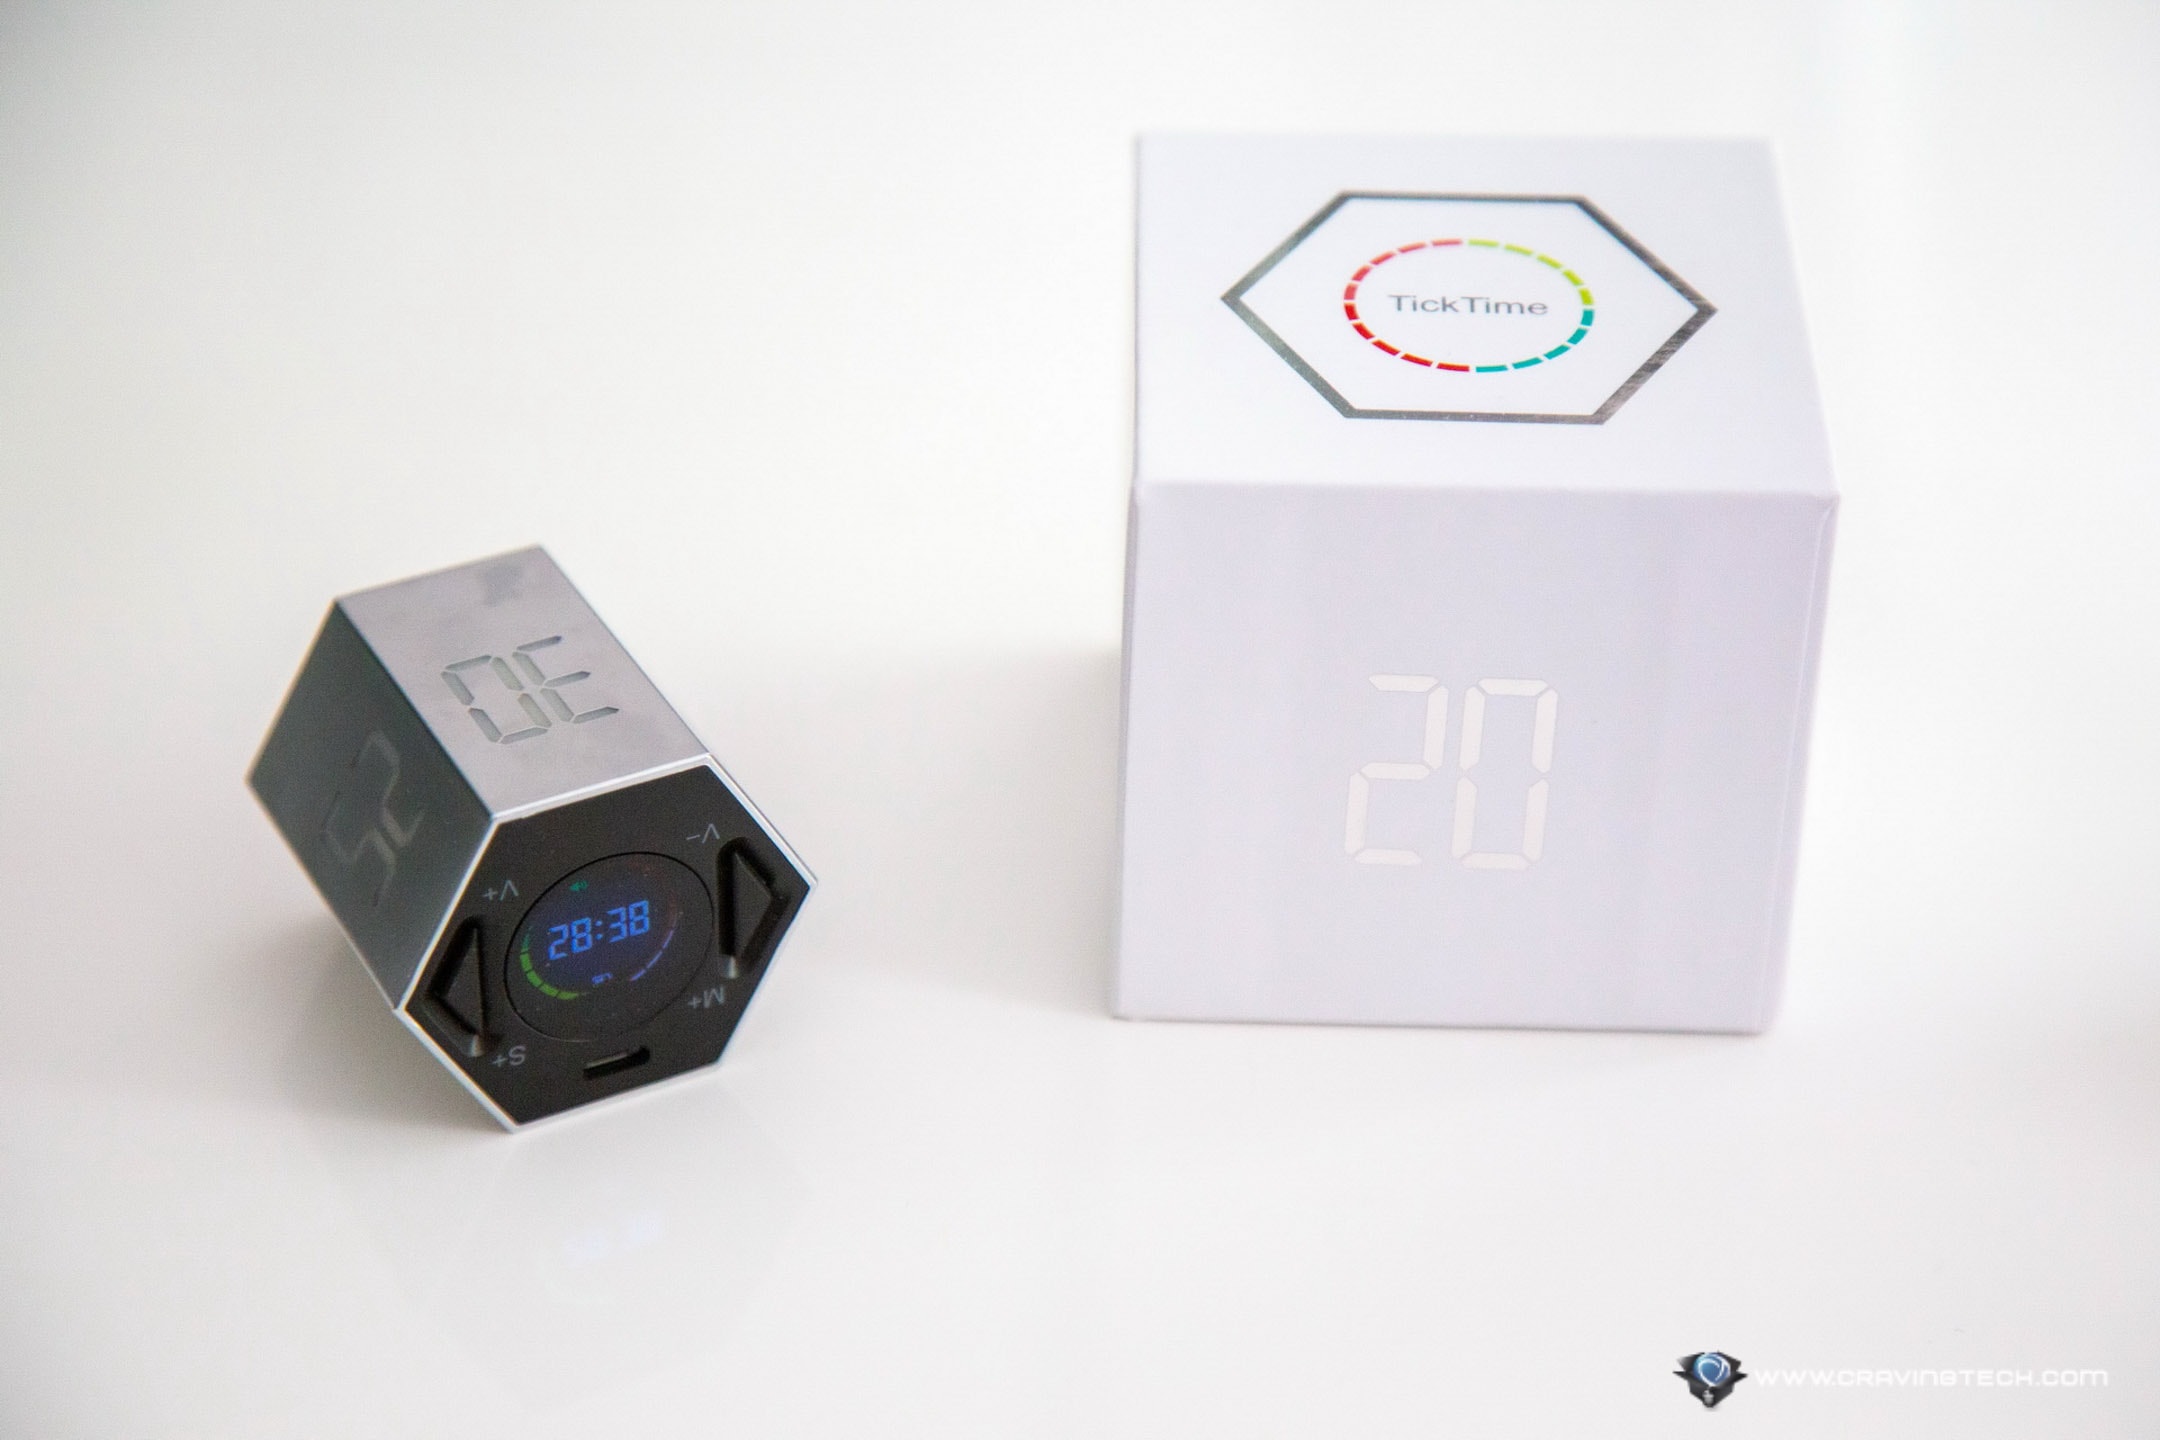 Into productivity or just looking for a cool timer?  Ticktime Review